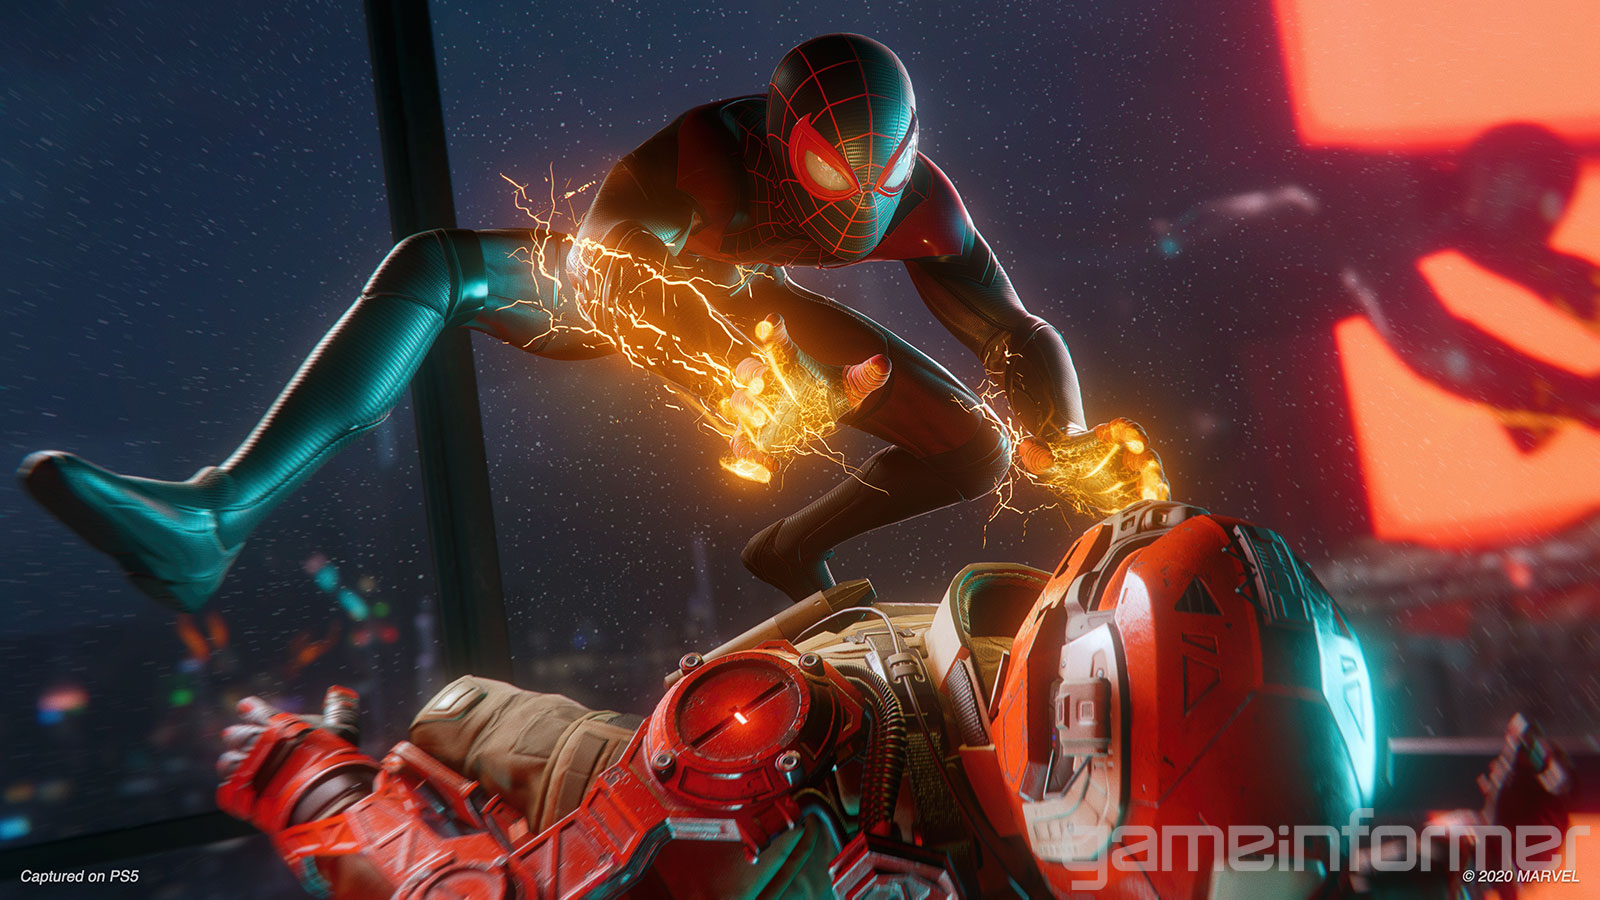 Spider-Man 2 PS5 Actor Teases Intense, Action-Packed Game